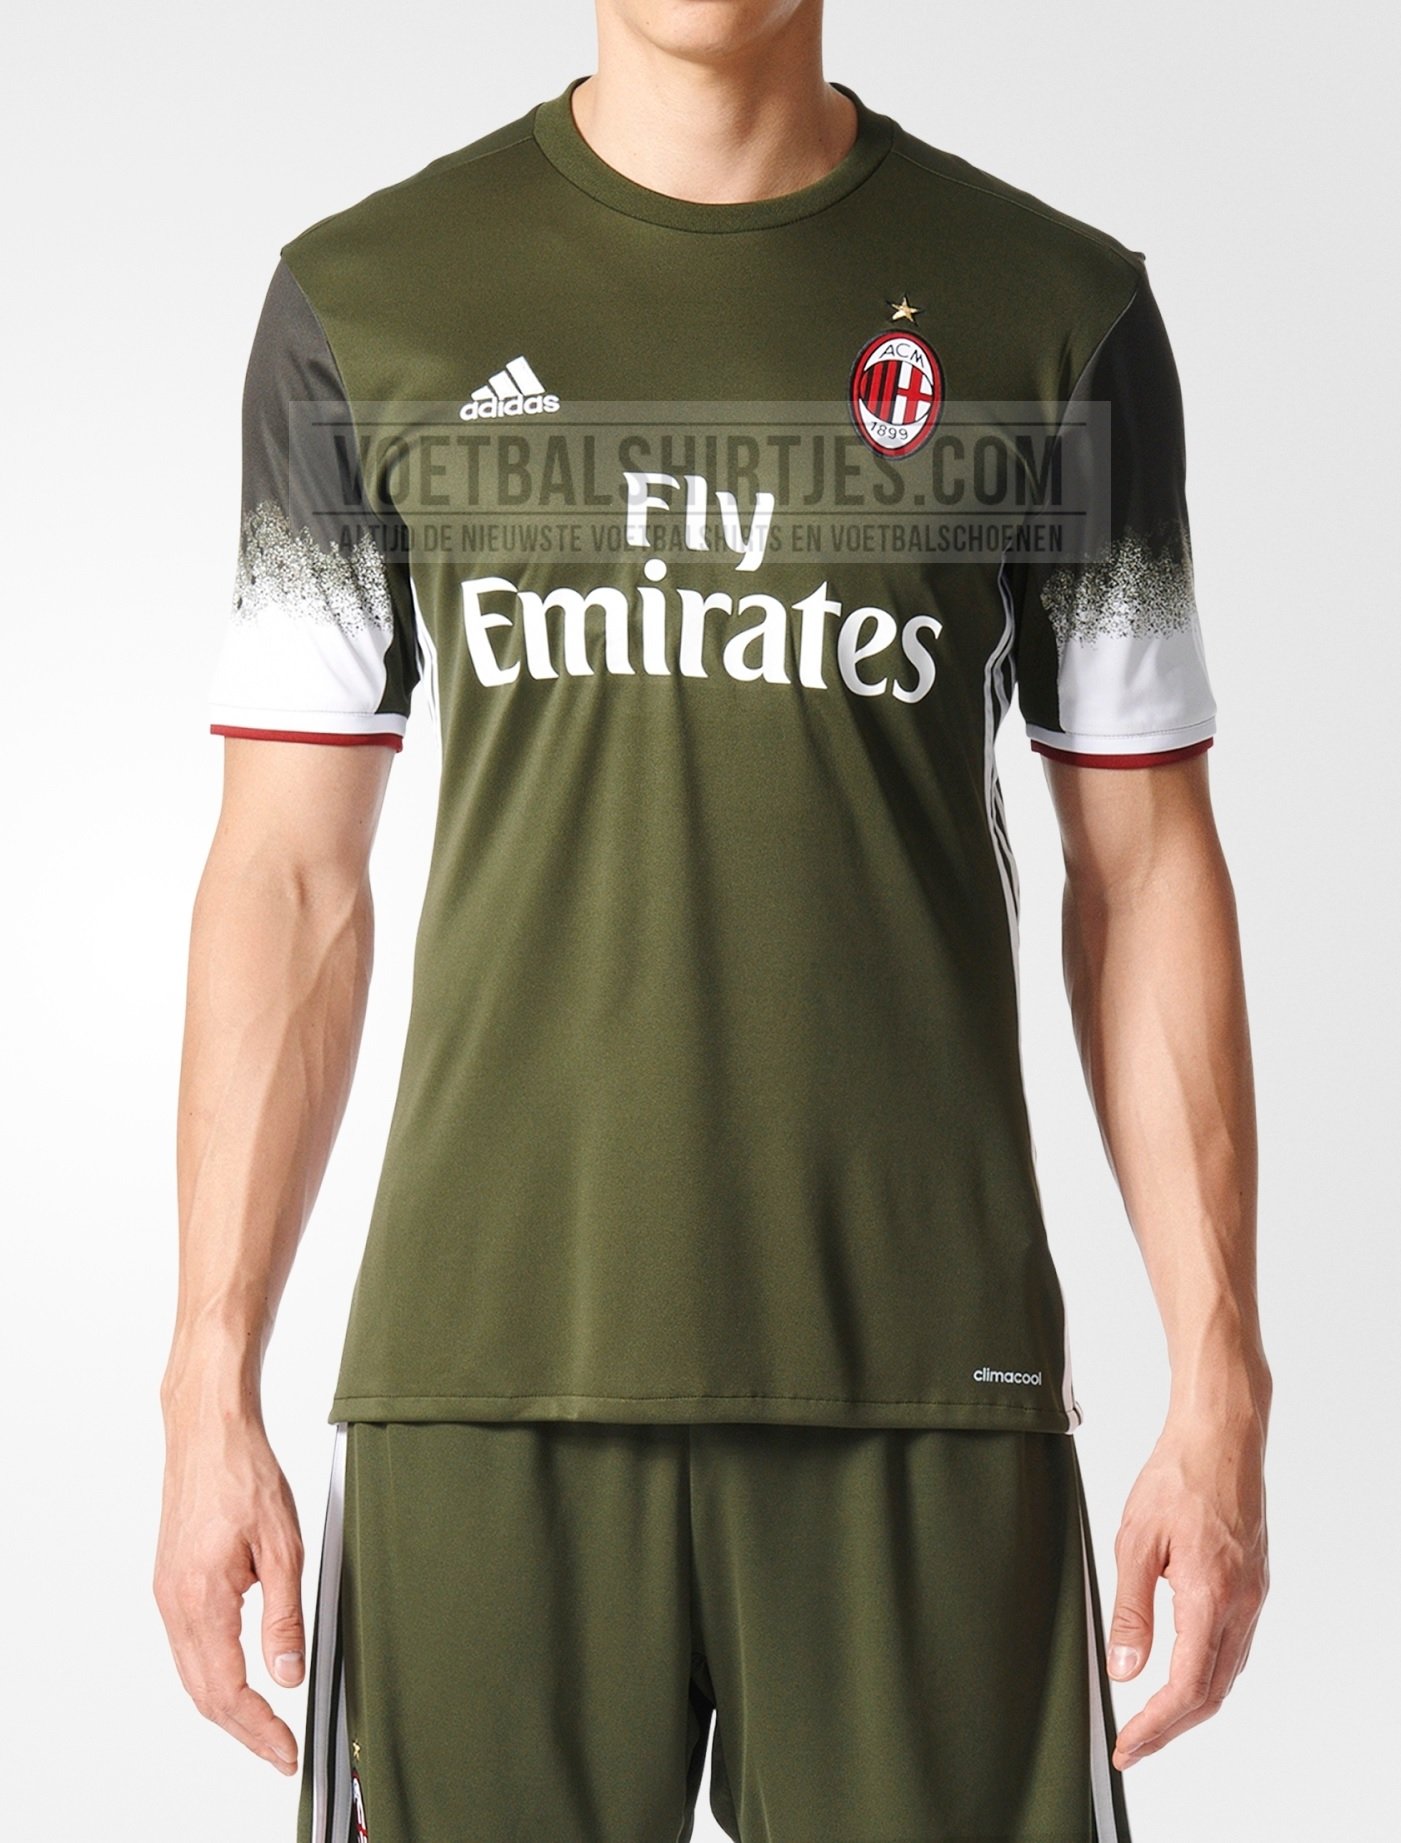 voetbalshirts on Twitter: MIlan third kit 2016-17 leaked https://t.co/j1B1HeBEBT #ACMilan #maglia @ACMilanNYC @Milanello @ACMilanNewsOnly https://t.co/DlPsjNDDCE" / Twitter